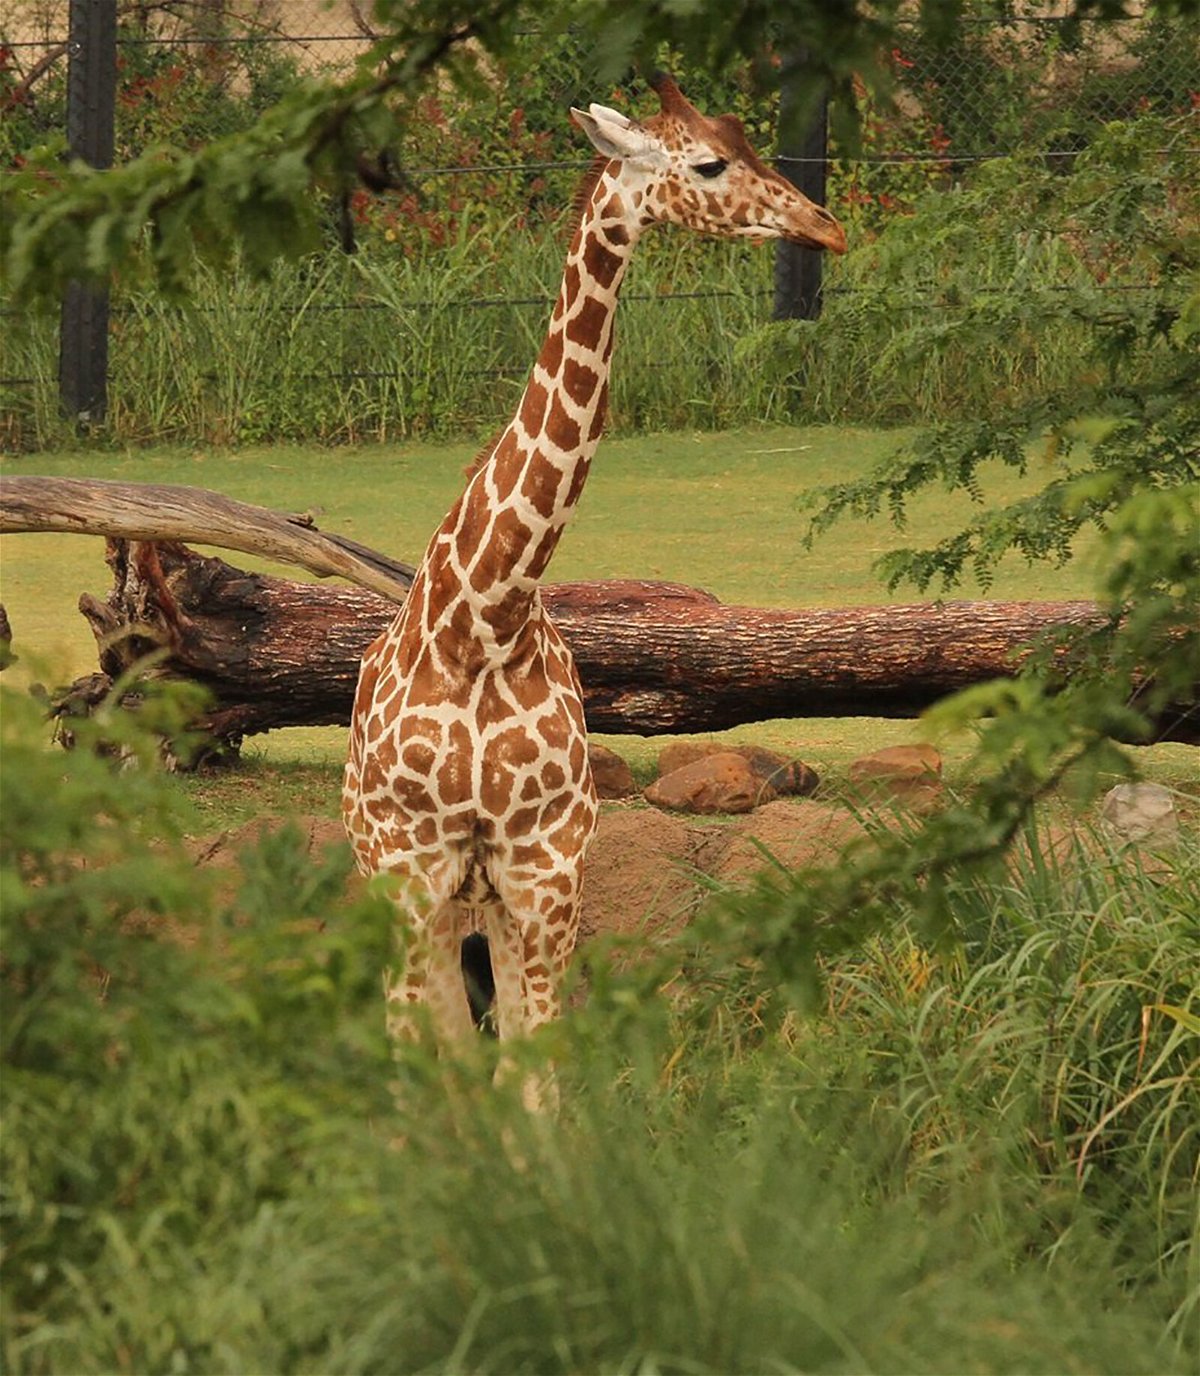 <i>Dallas Zoo</i><br/>A third giraffe has died at the Dallas Zoo in less than a month